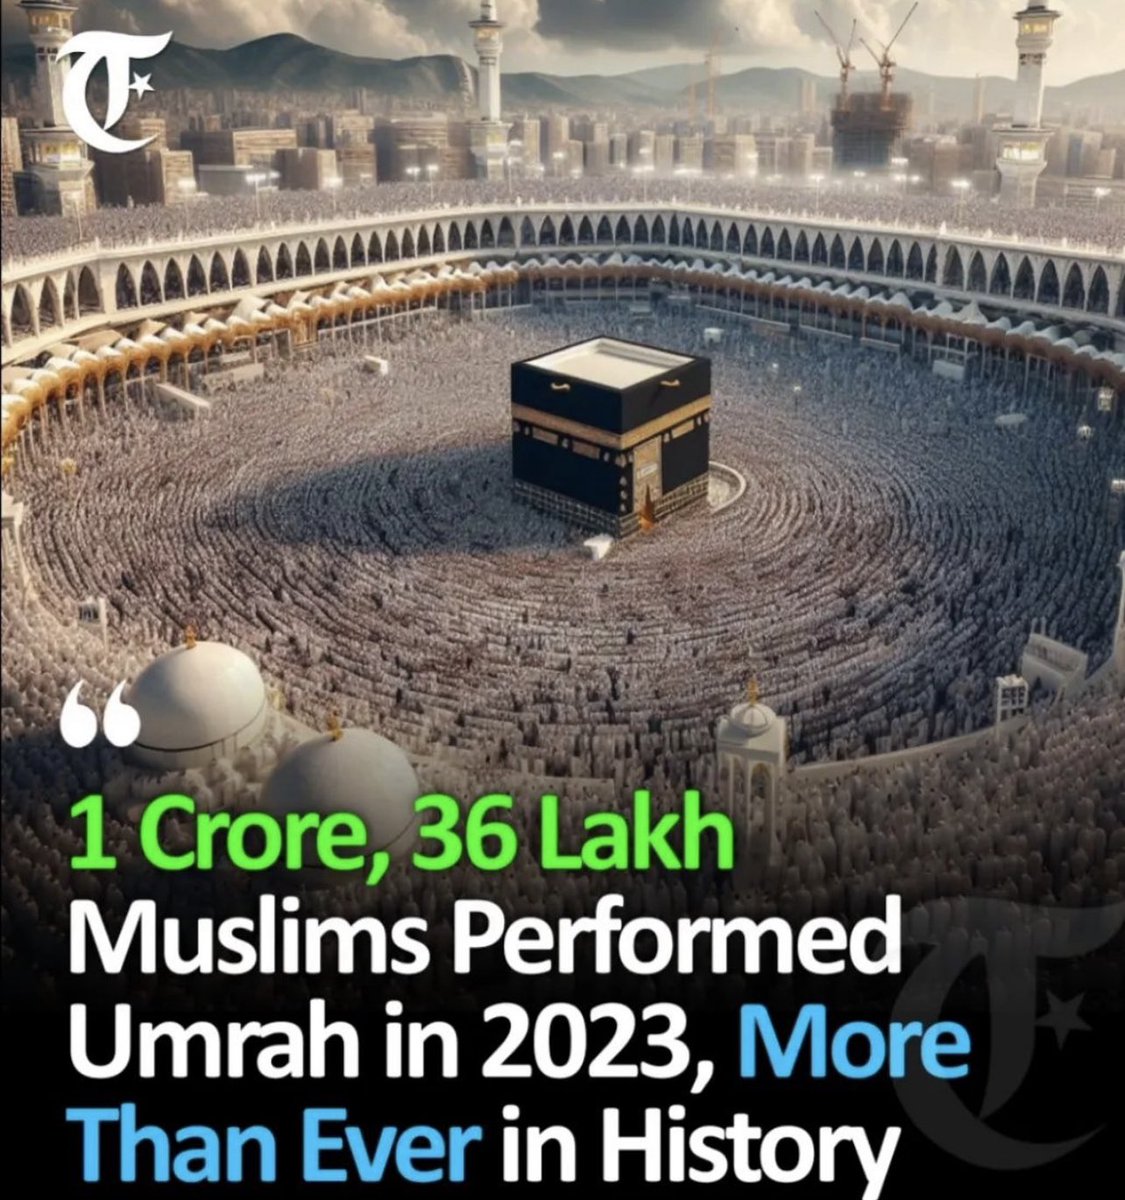 2023 was a historic year 🕋 ❤️